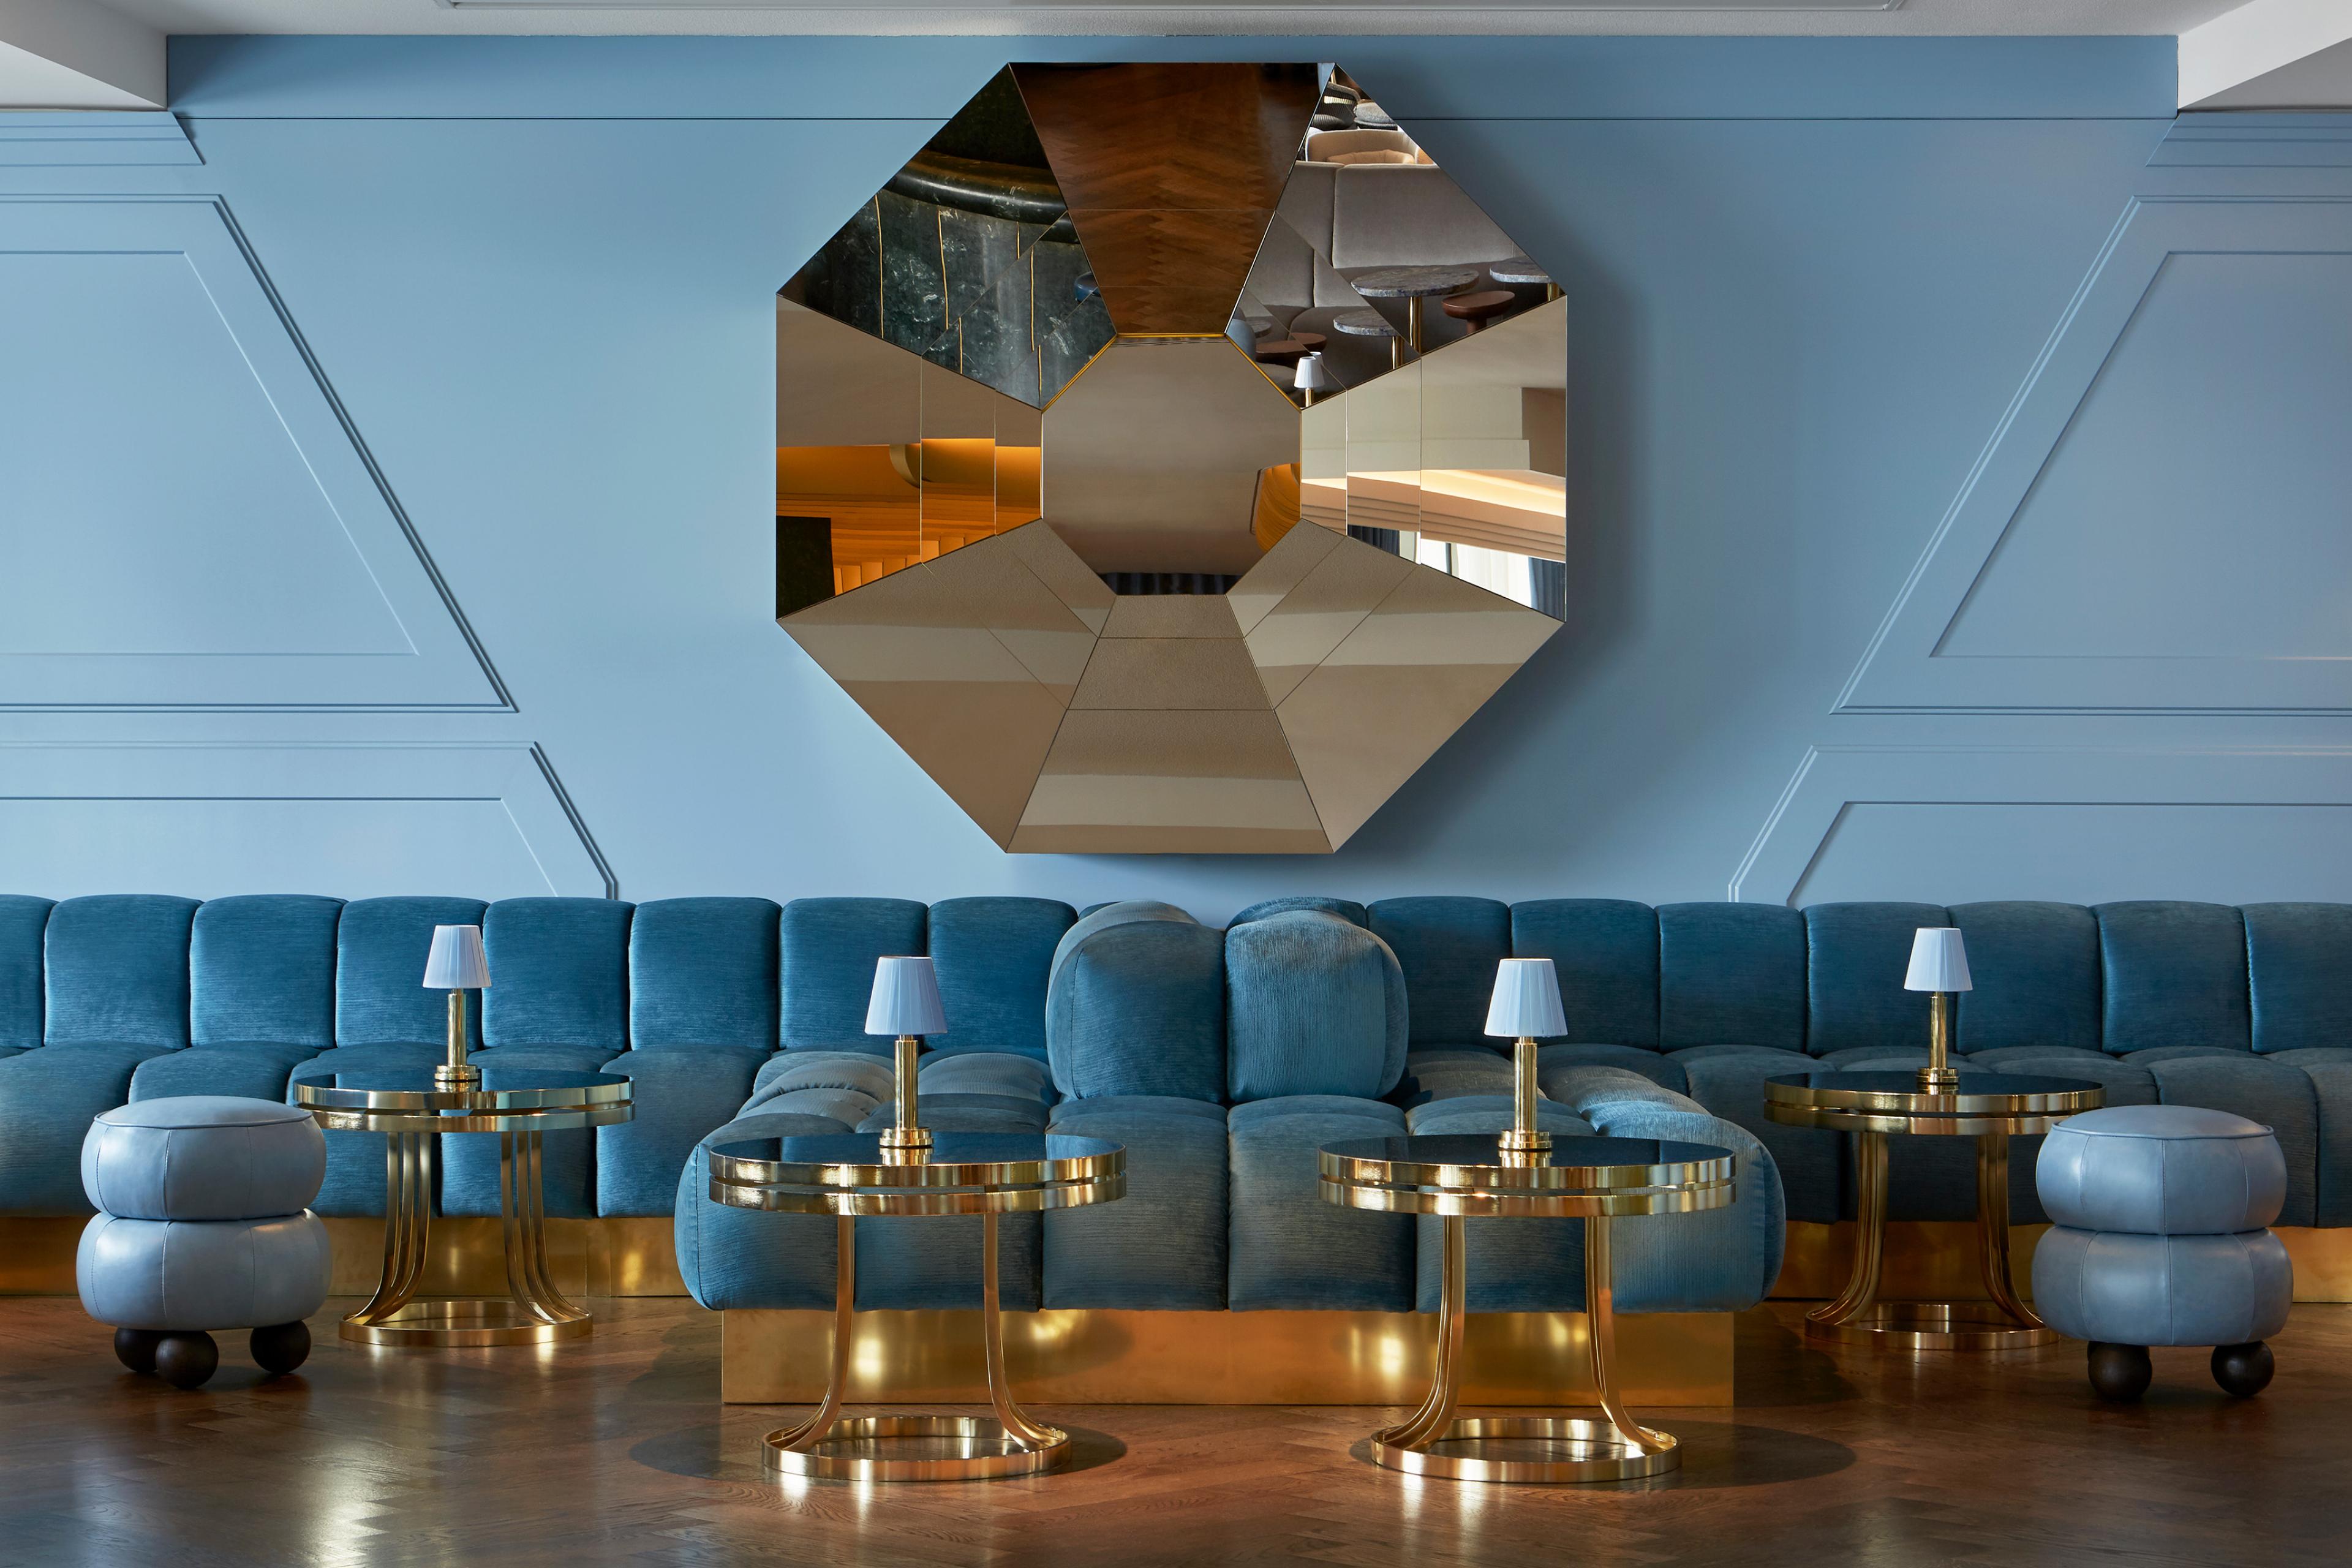 bar interior with plush blue seating and an octagonal mirror on the wall